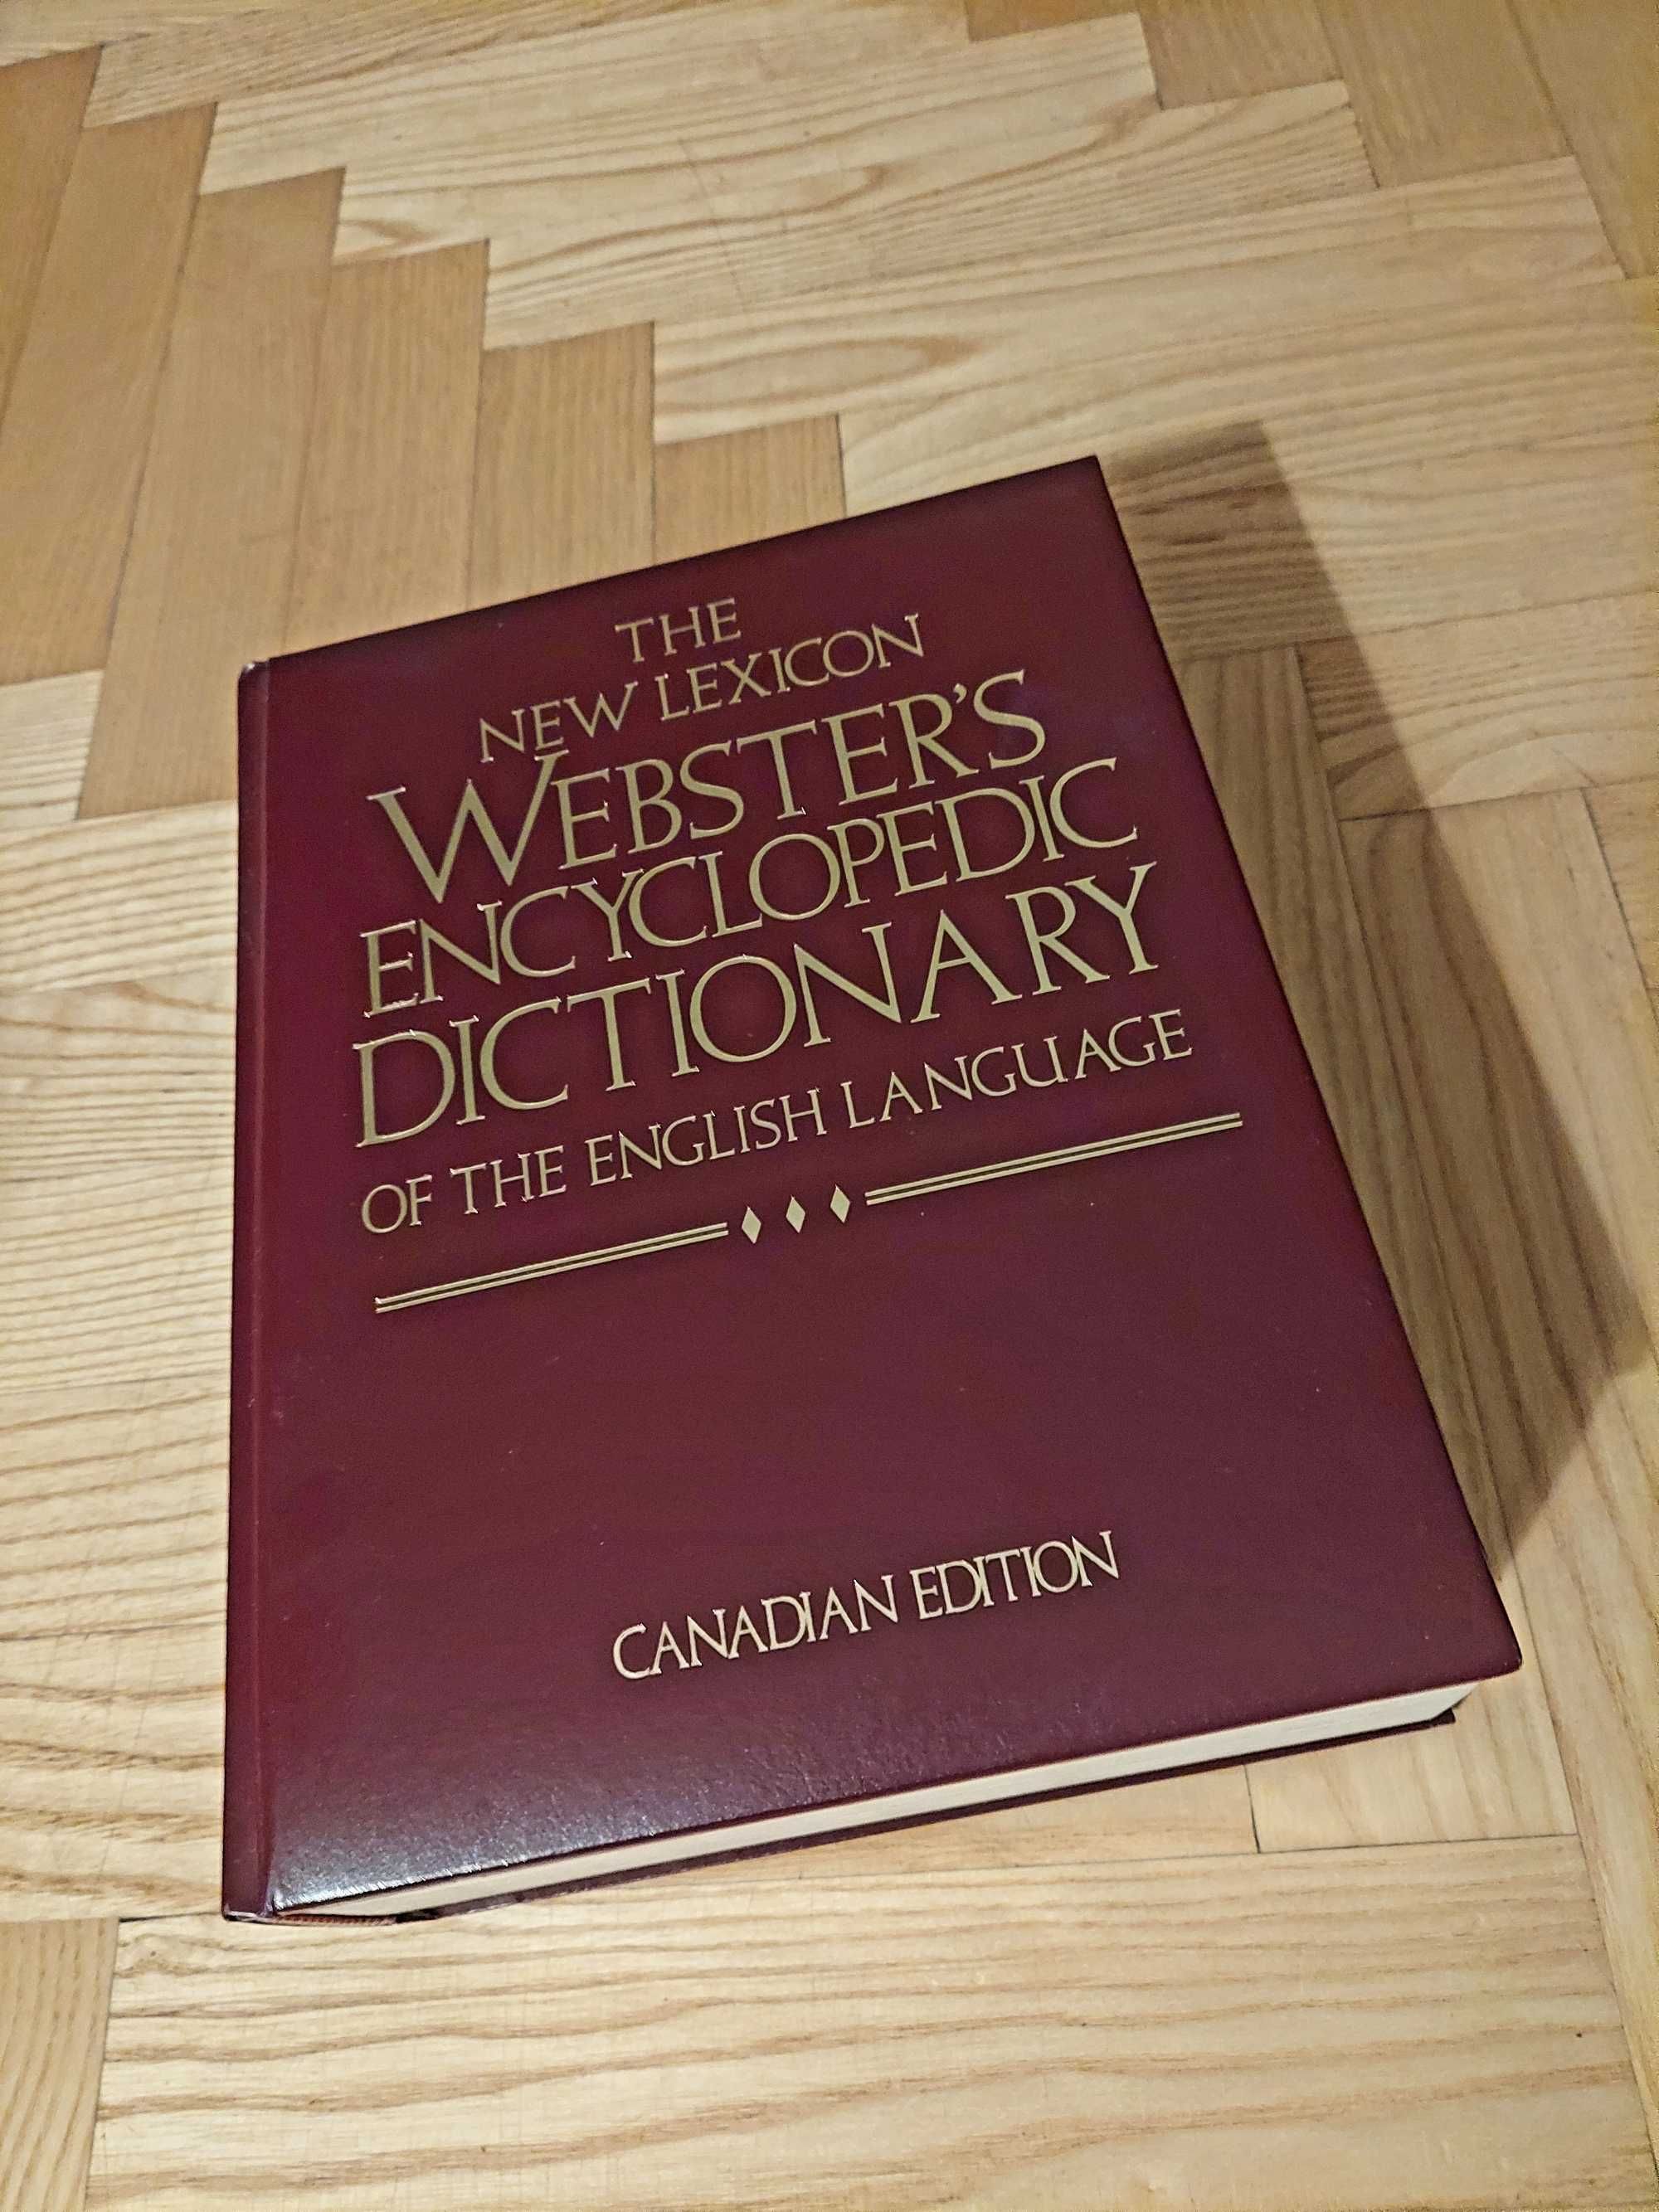 Webster's Encyclopedic Dictionary of the English Language